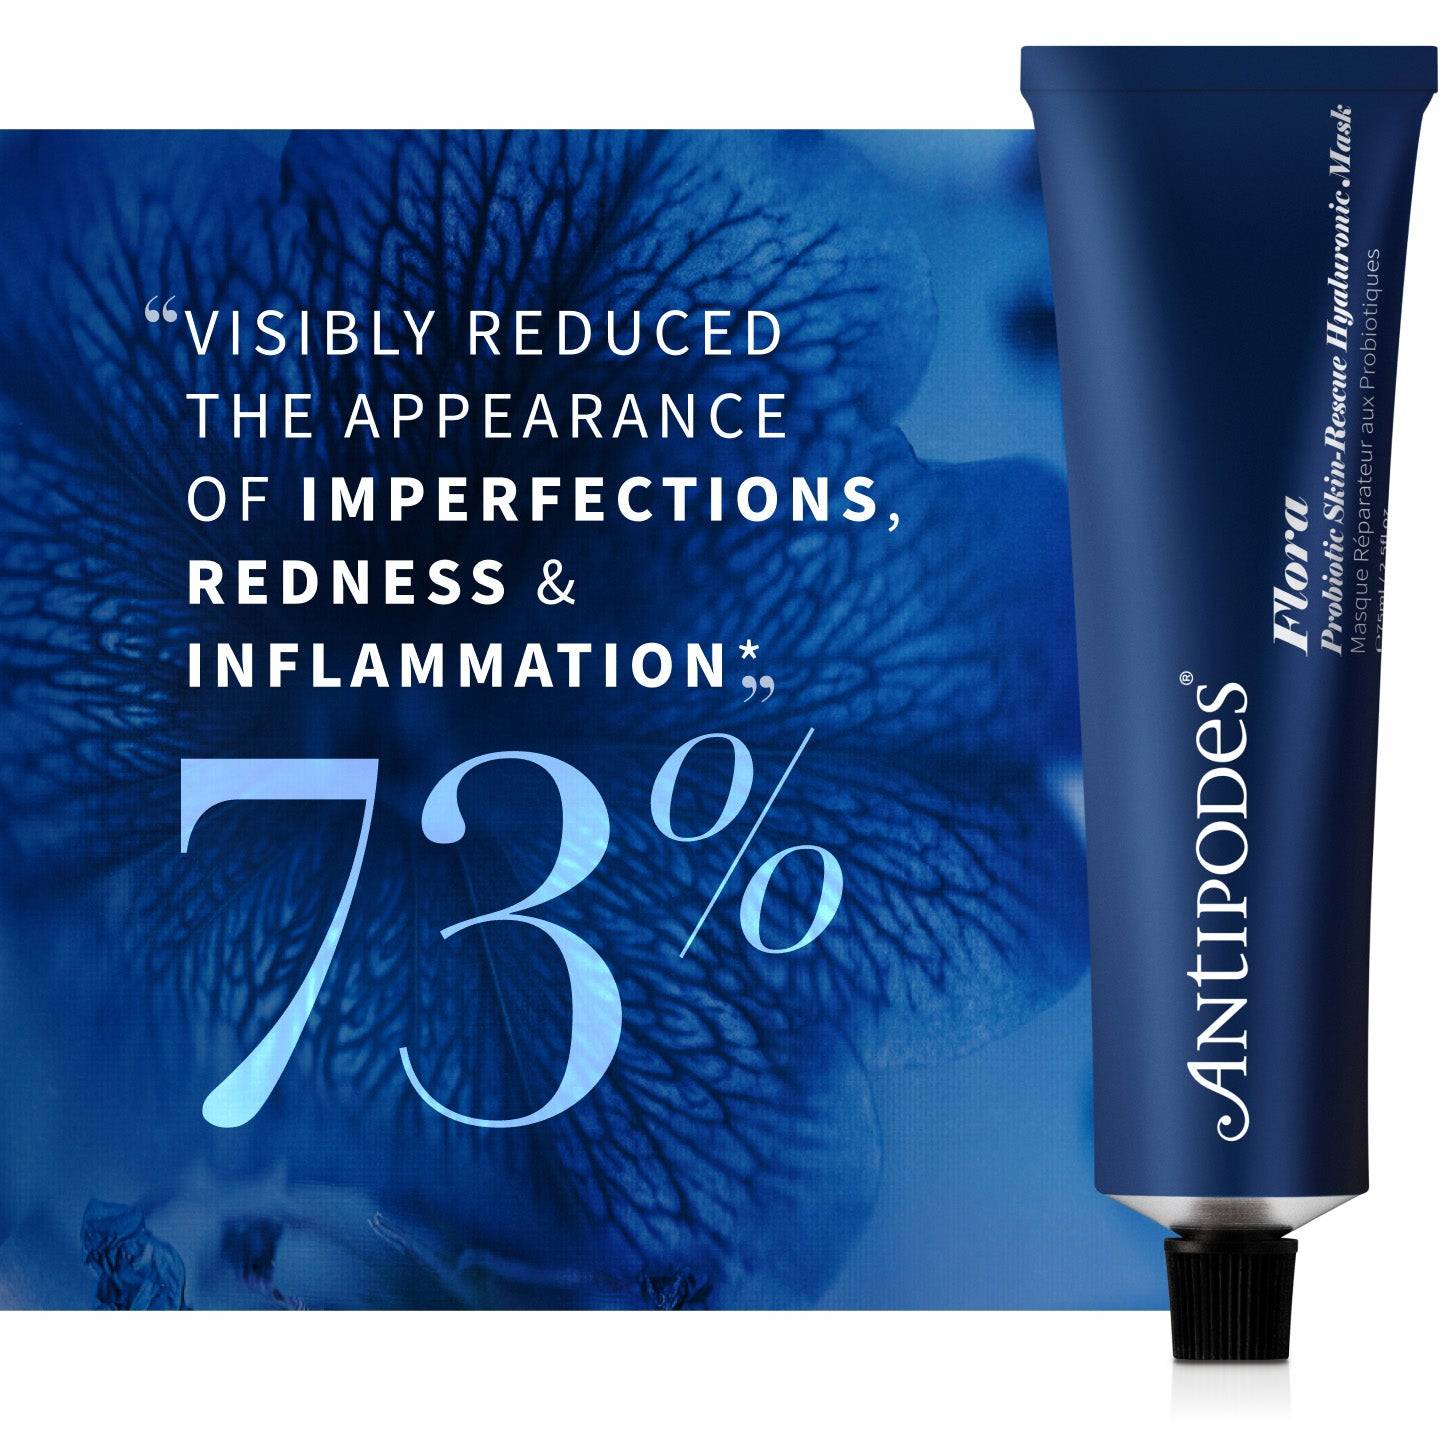 73% “visibly reduced the appearance of imperfections, redness & inflammation”*.